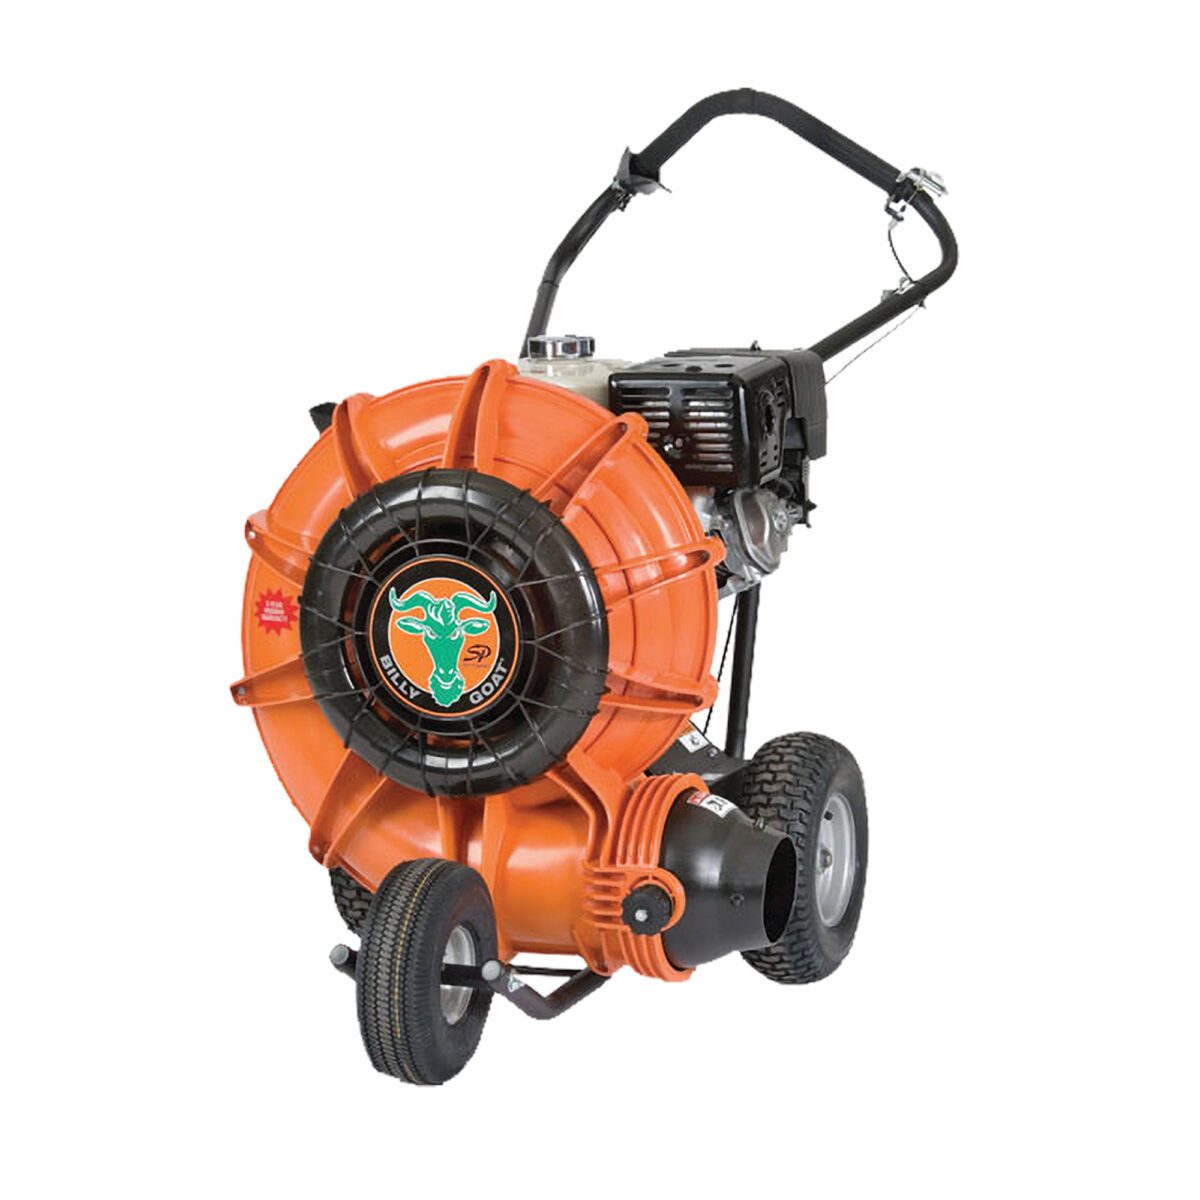 Billy Goat Force blower